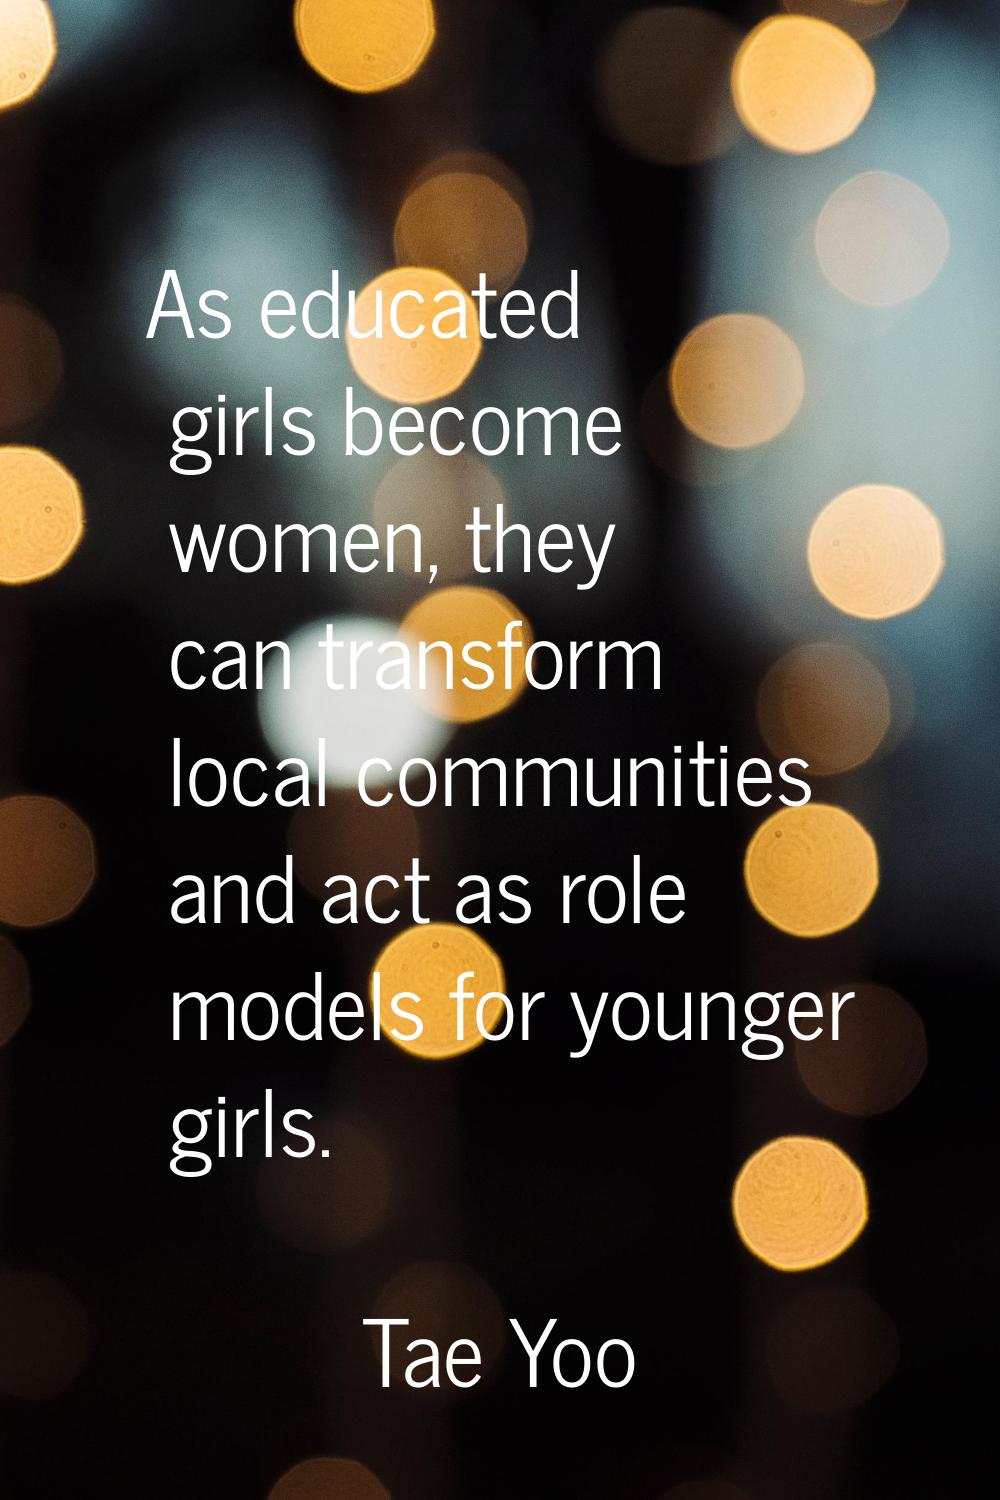 As educated girls become women, they can transform local communities and act as role models for you